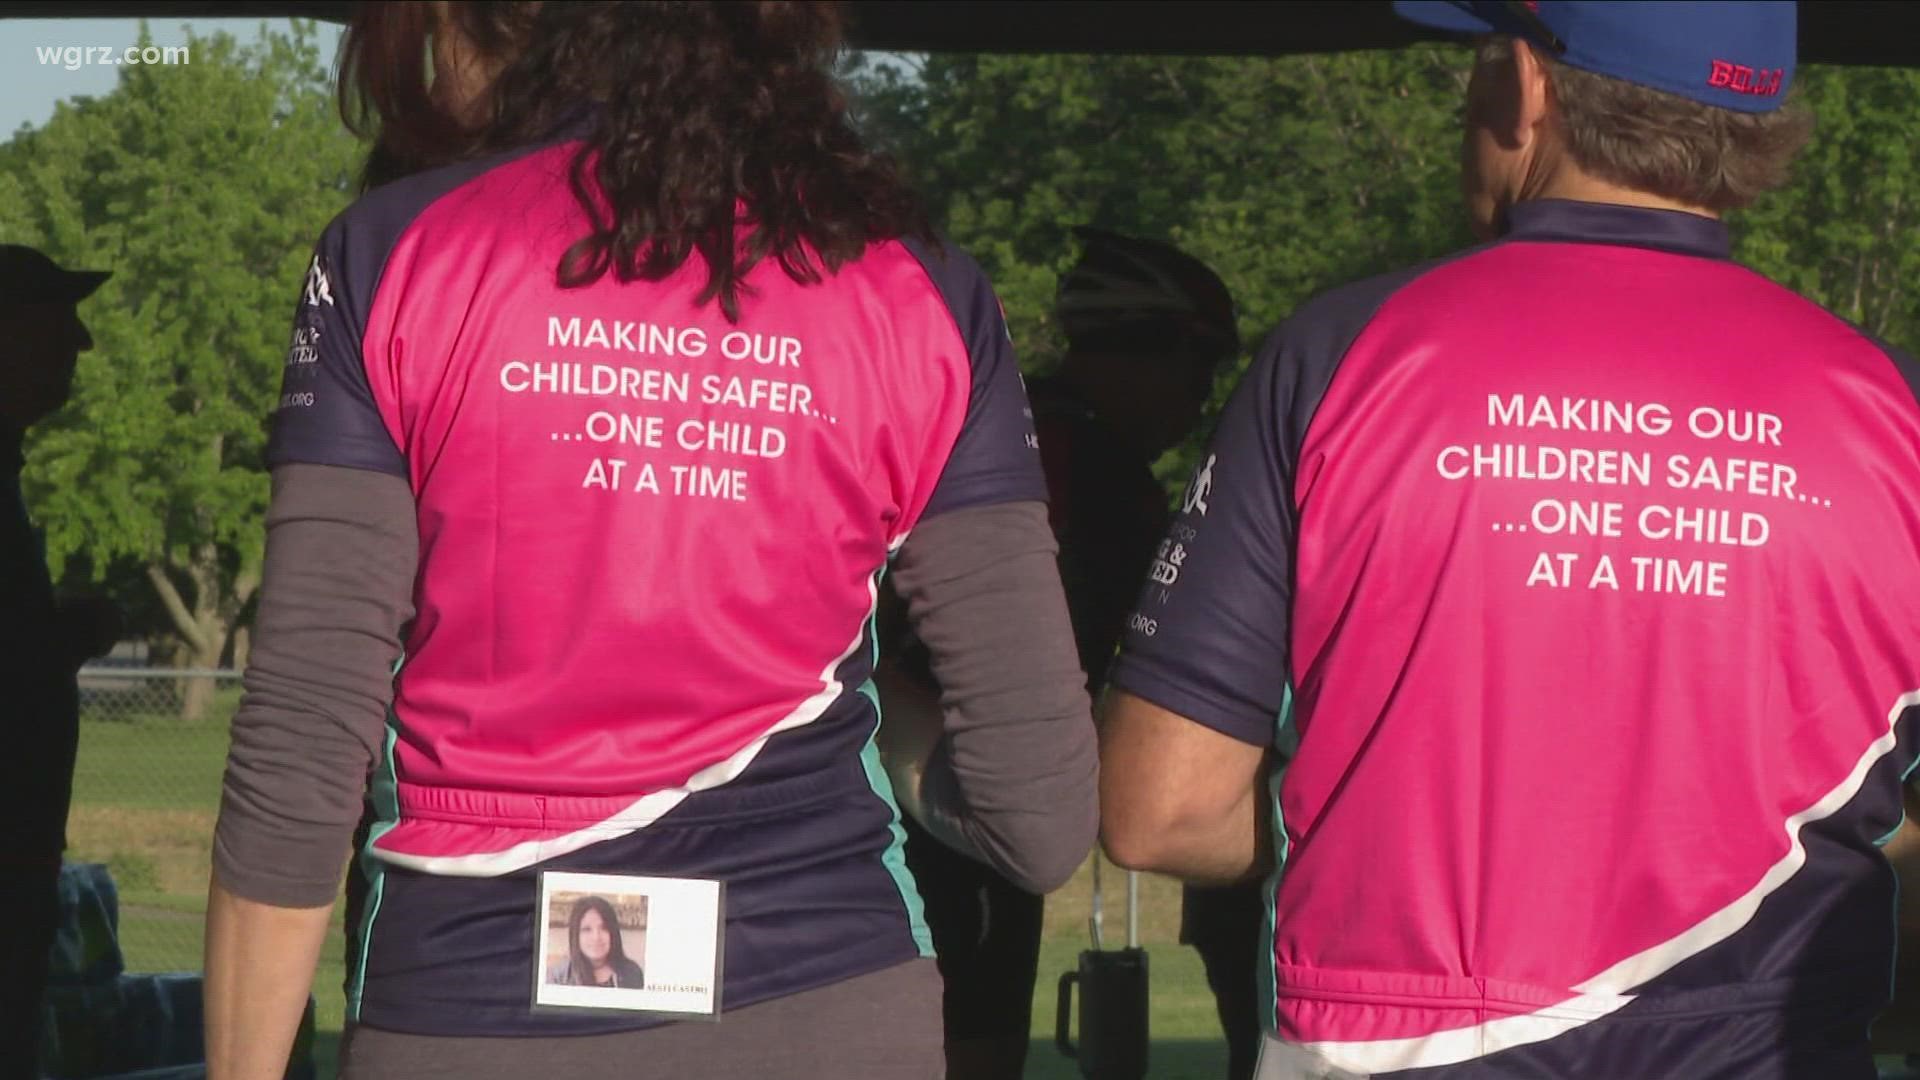 The ride for missing children returned to the streets of Erie County. Cyclists made the 100-mile trek around the county ending at Cheektowaga Town park.